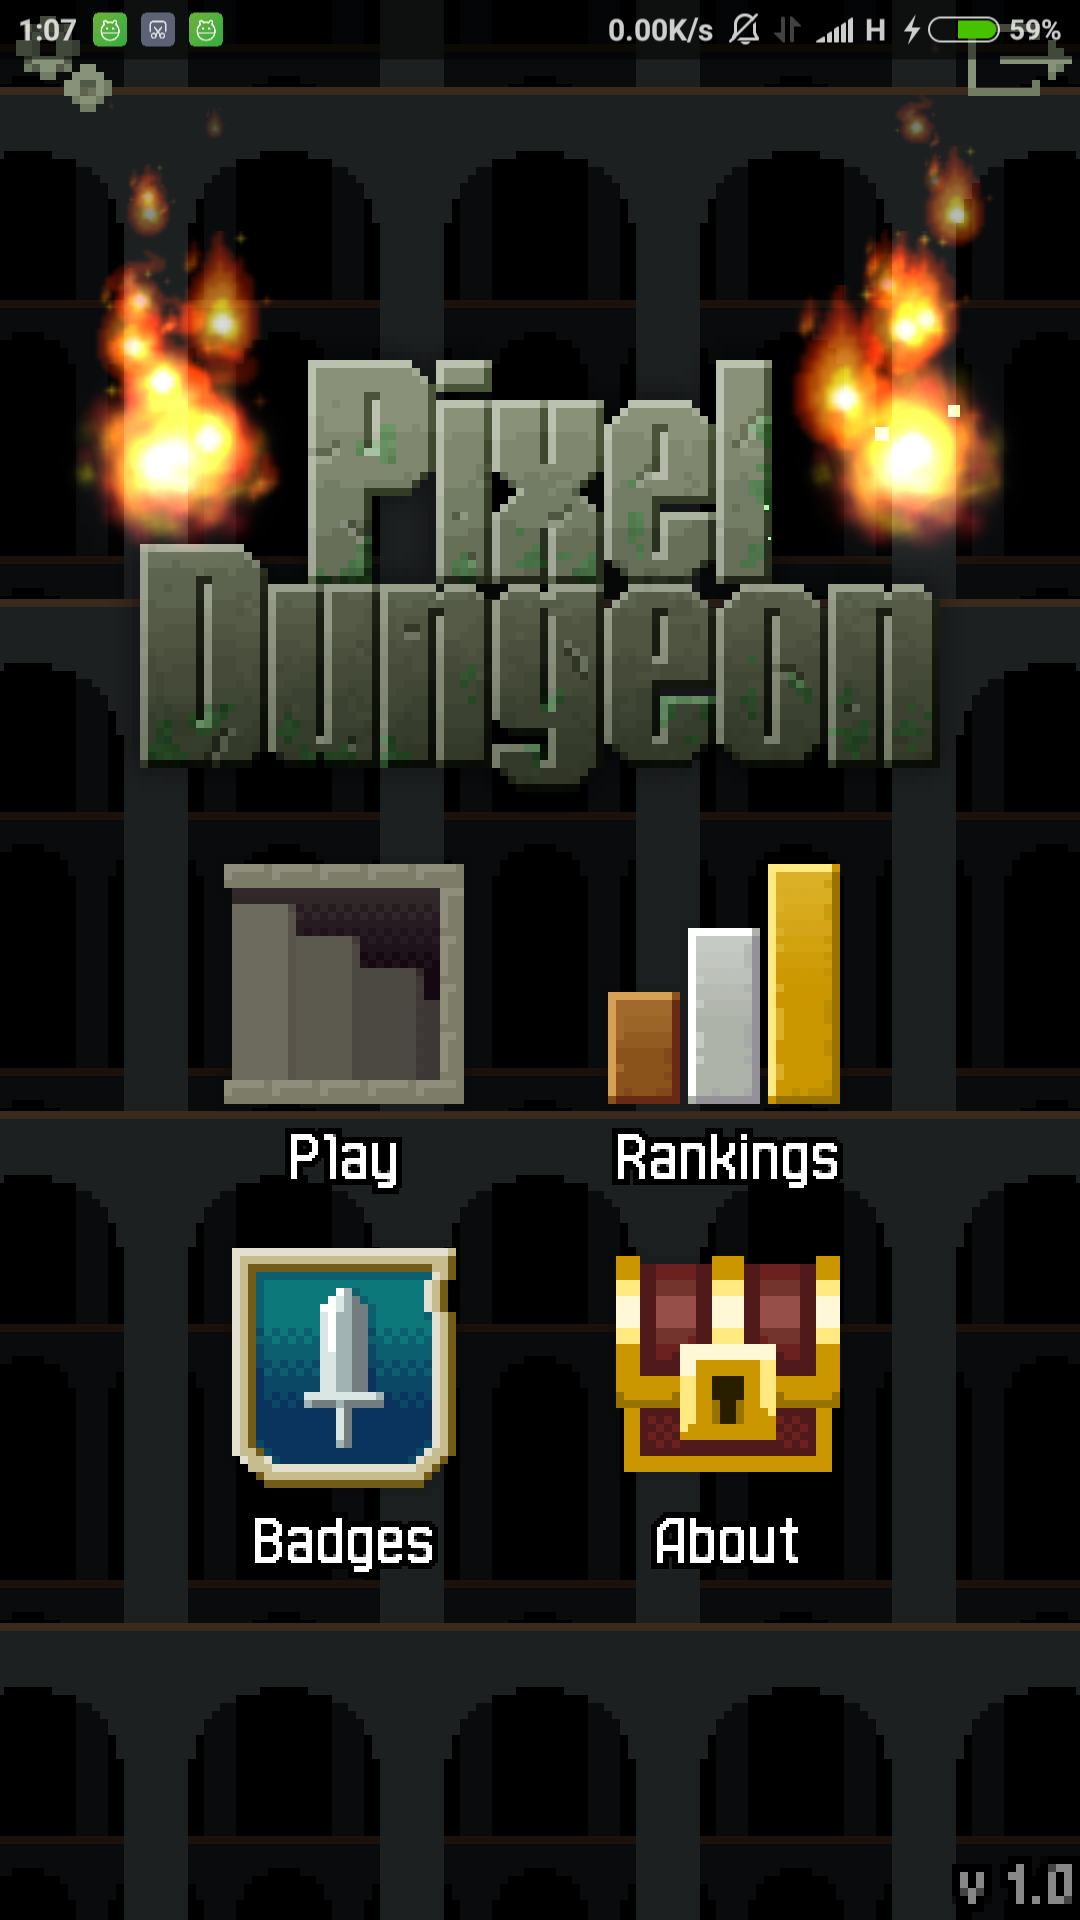 Escape Pixel Dungeon for Android - APK Download - 